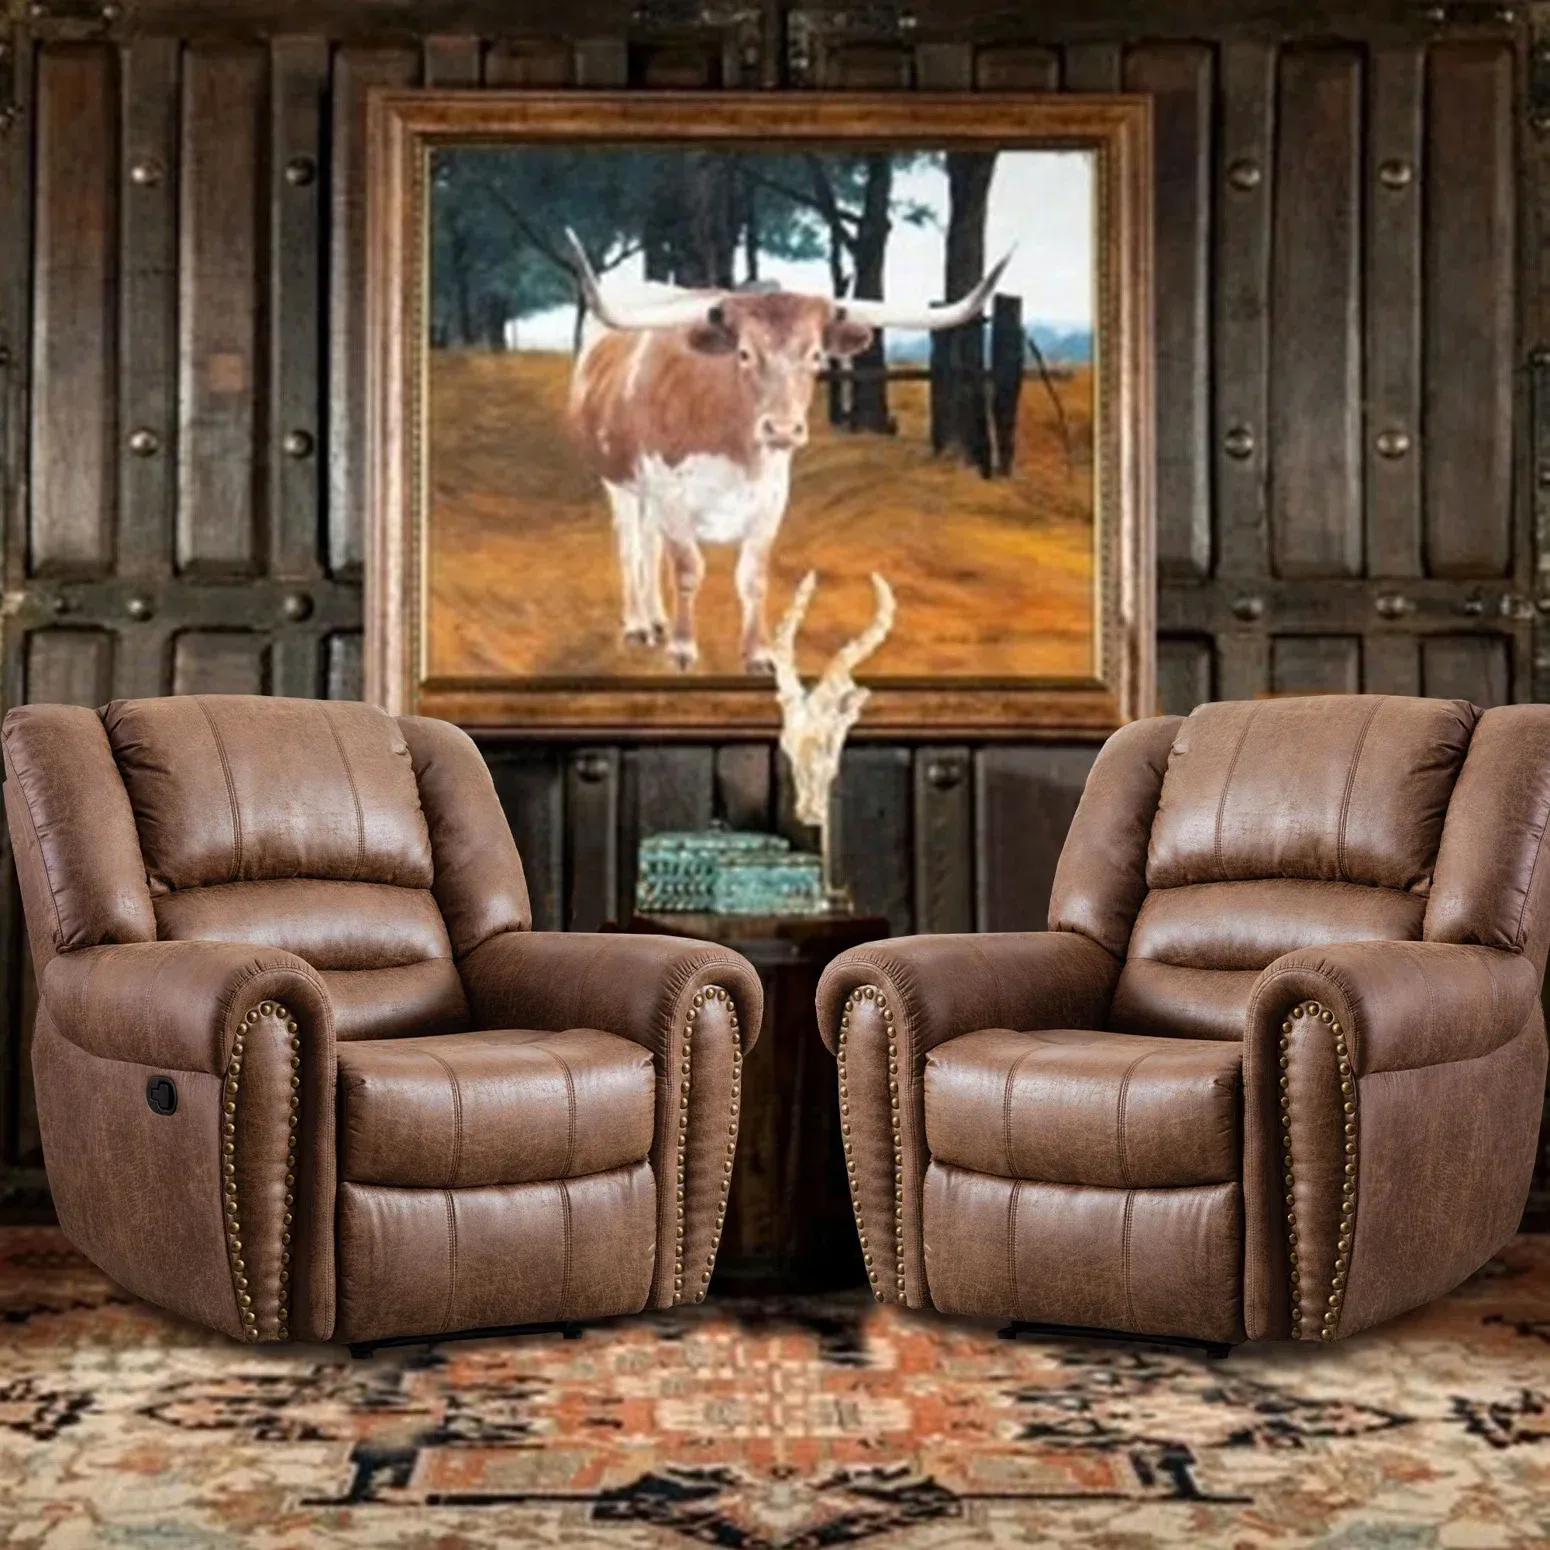 Two brown reclining chairs with studded detailing in a rustic room with a cow-themed painting on the wall.